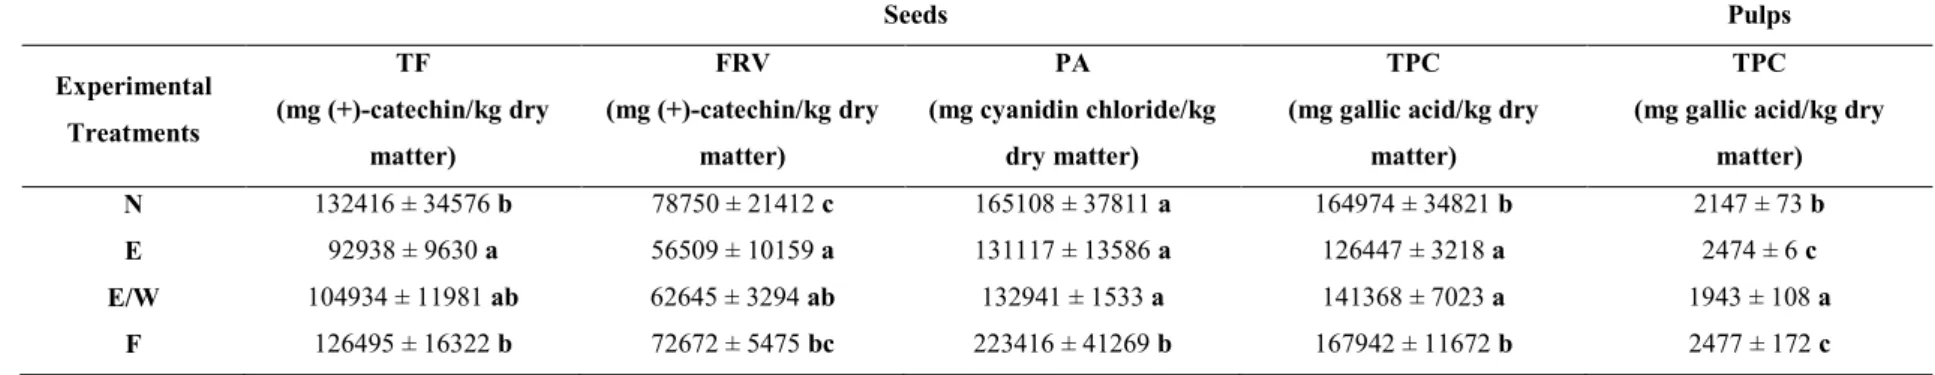 Table 7 – Effect of leaf removal on the phenolic profile of seeds of Uva di Troia grapes